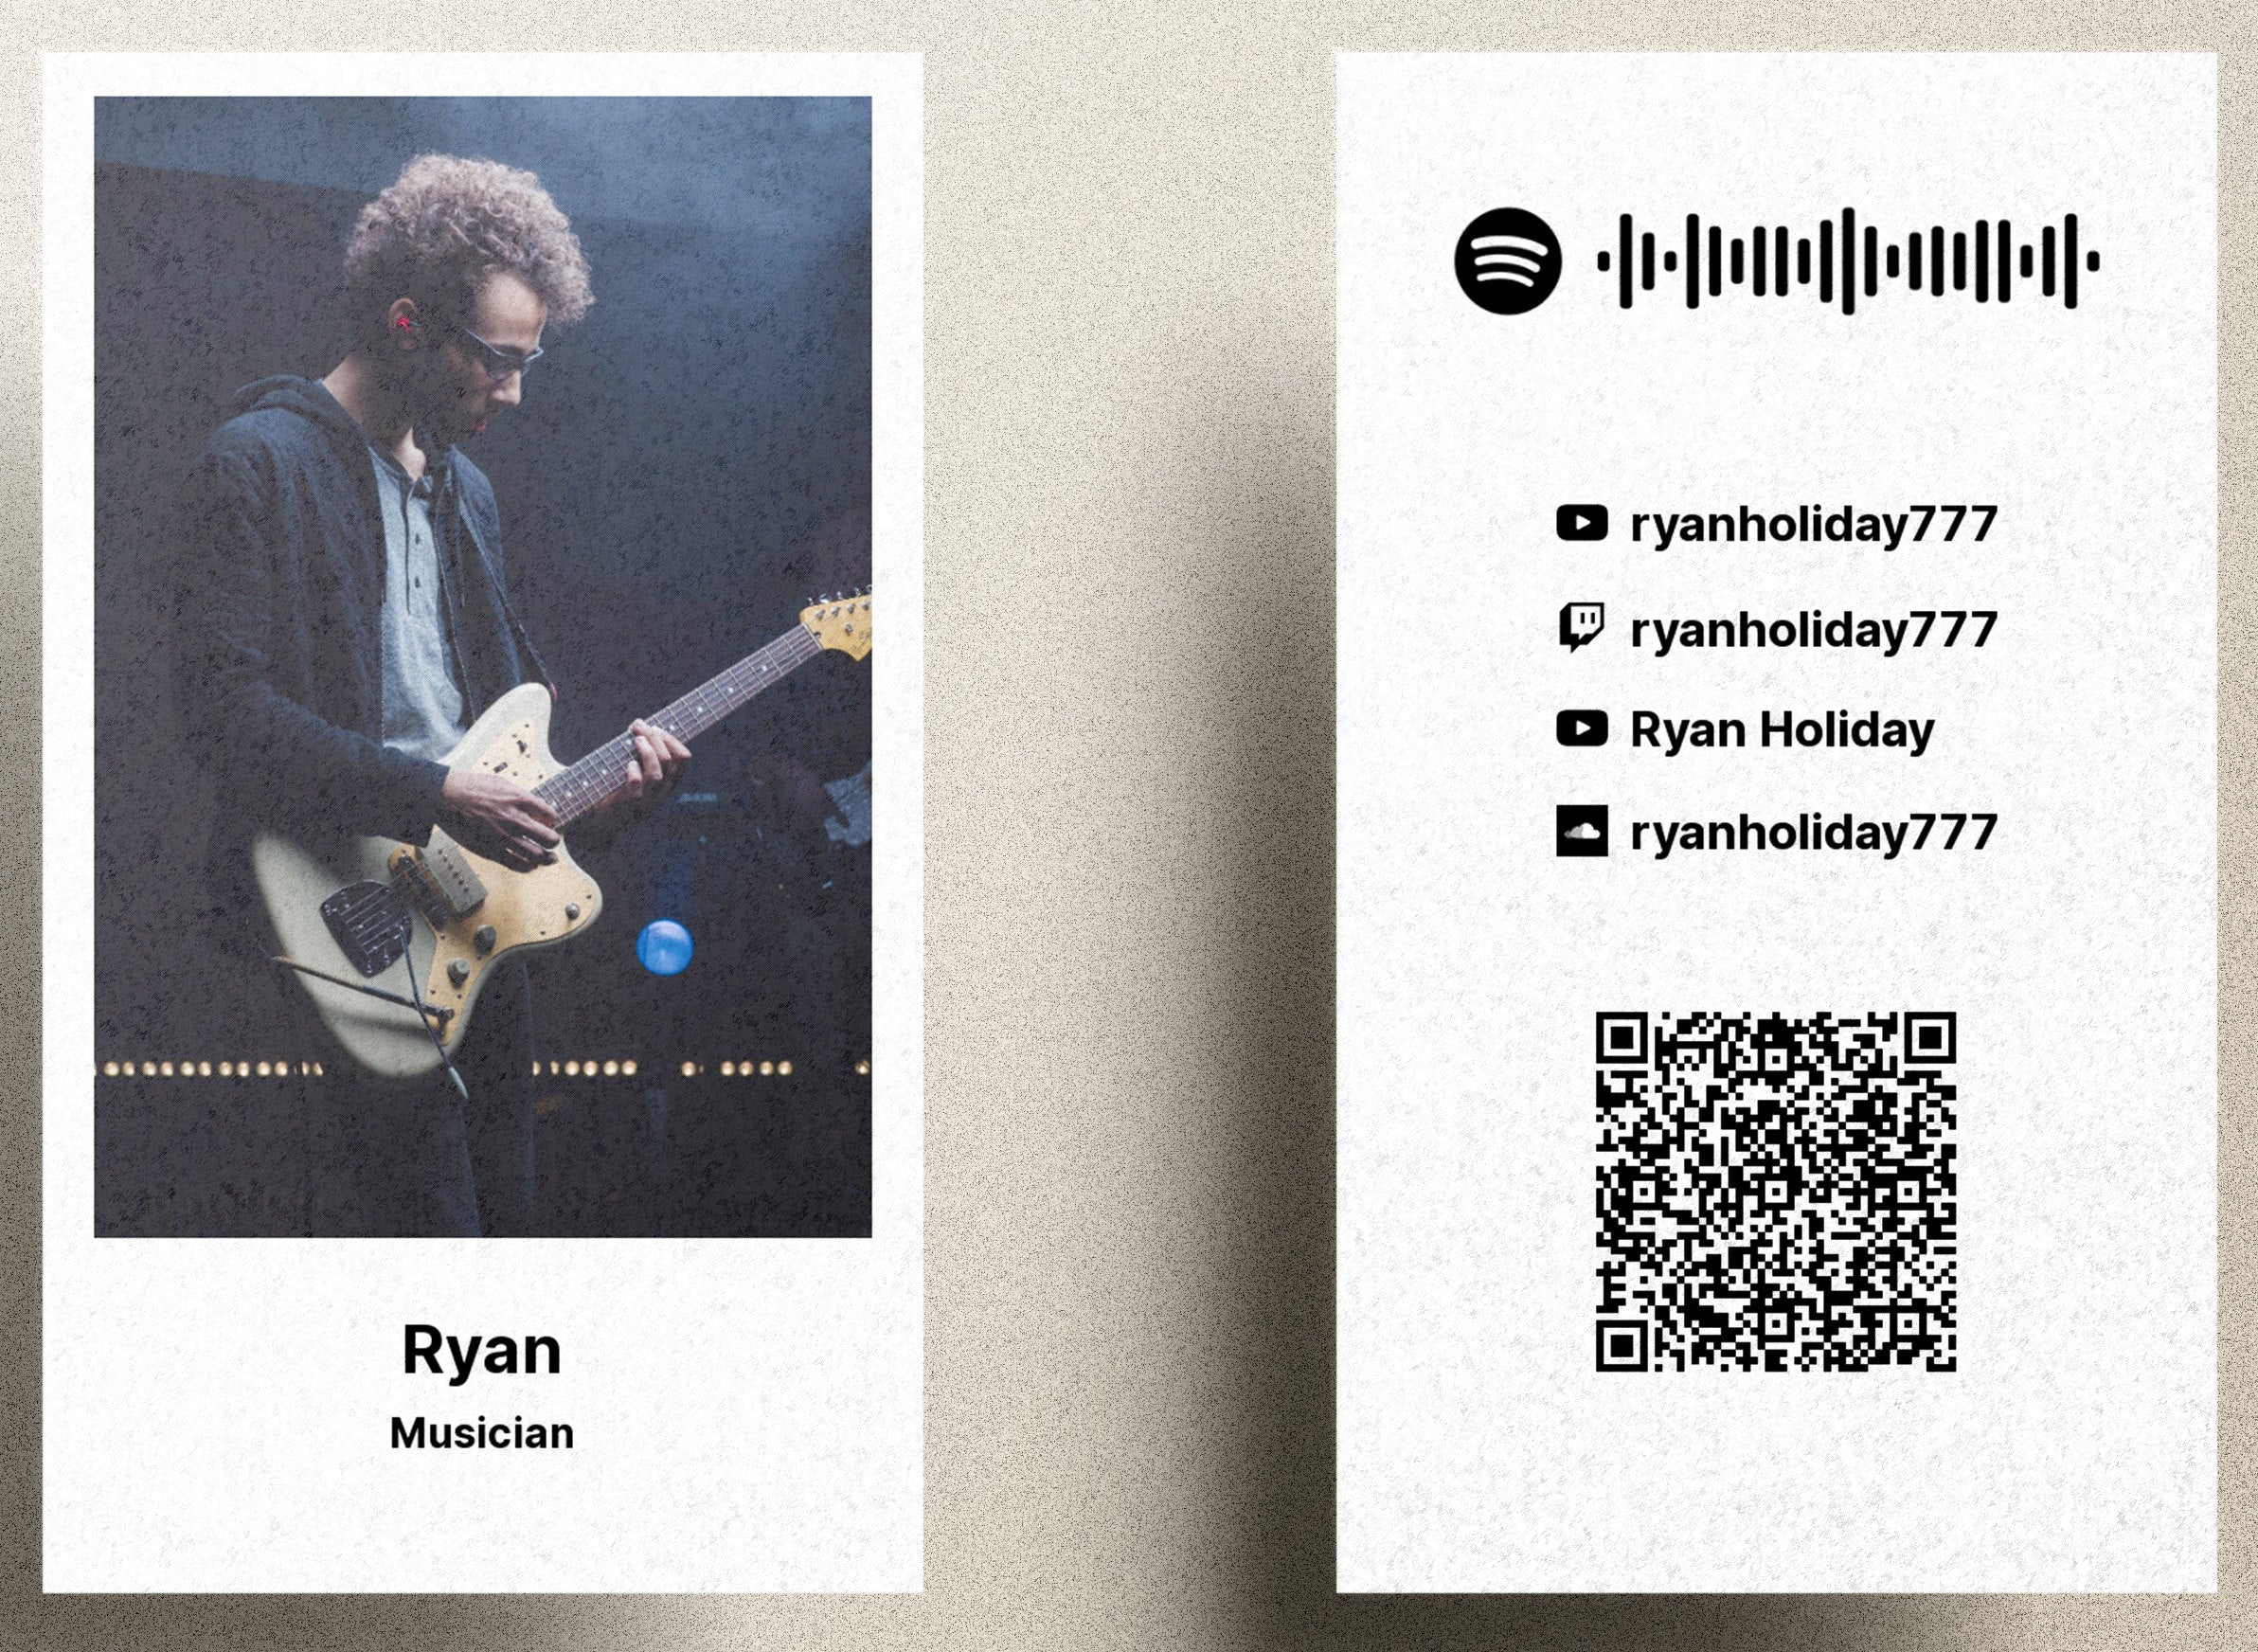 Vertical Photo Spotify QR Code Business Card Design Template For Rappers, Artists, DJs, Producers, Musicians And Influencers